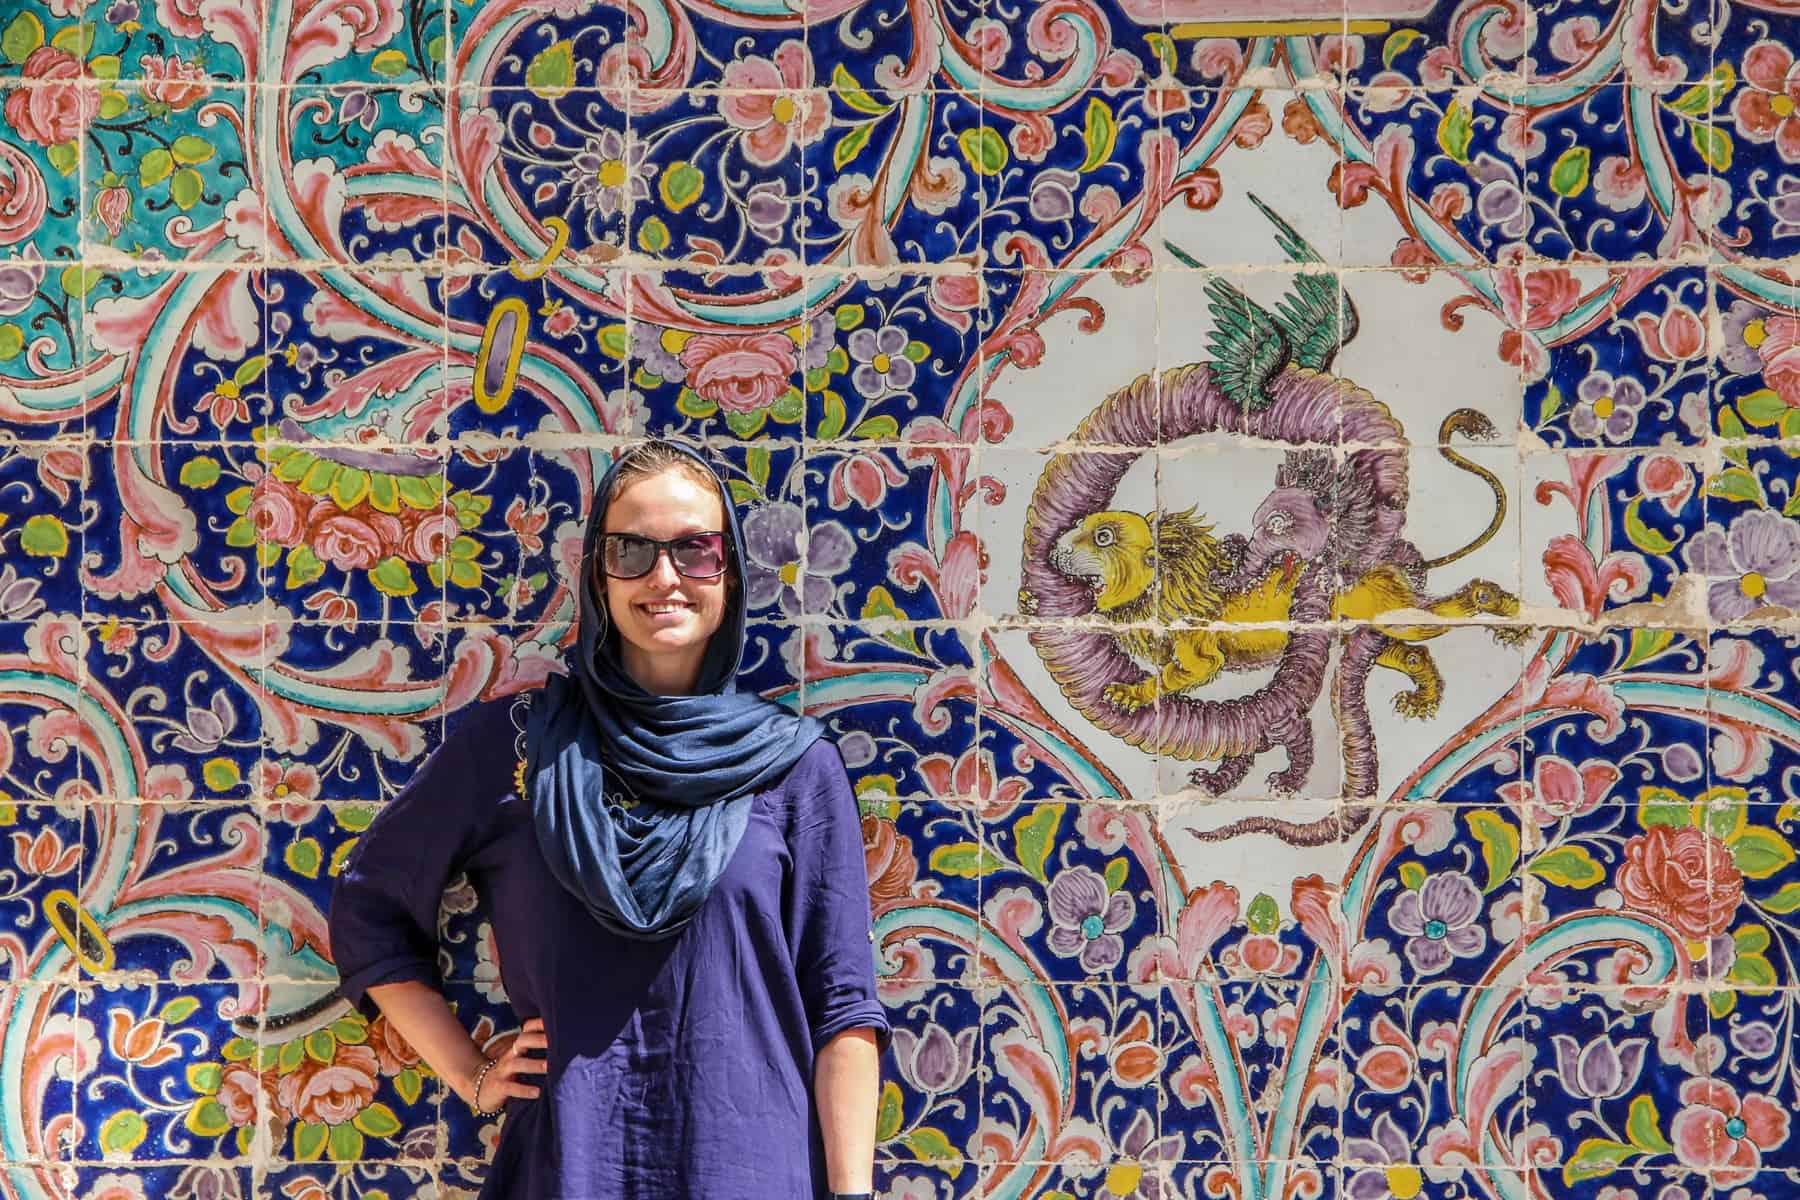 Iran Dress Code - What to Wear in Iran Like a Local